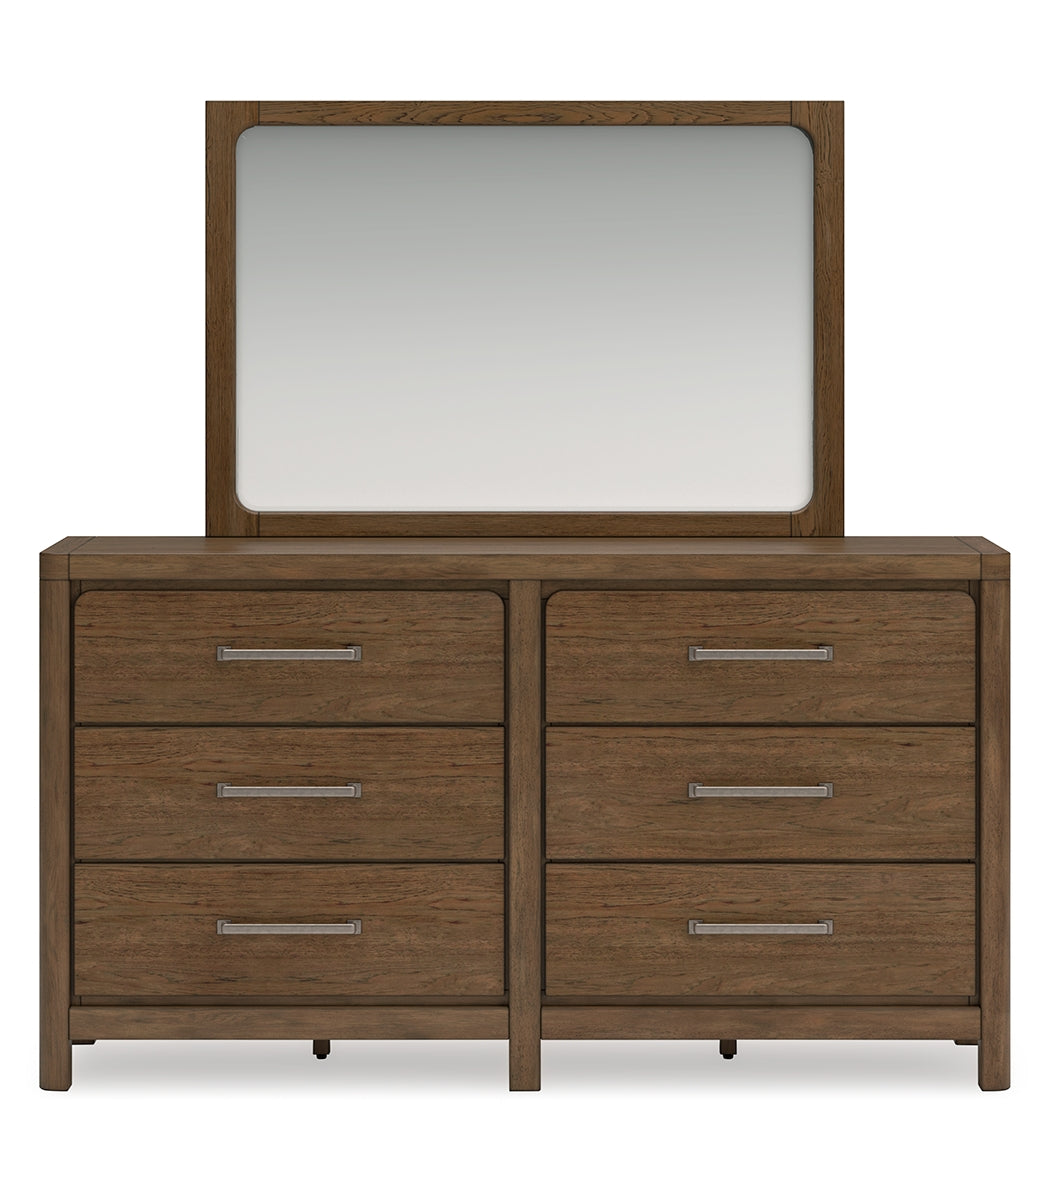 Cabalynn Queen Panel Bed with Storage with Mirrored Dresser, Chest and 2 Nightstands